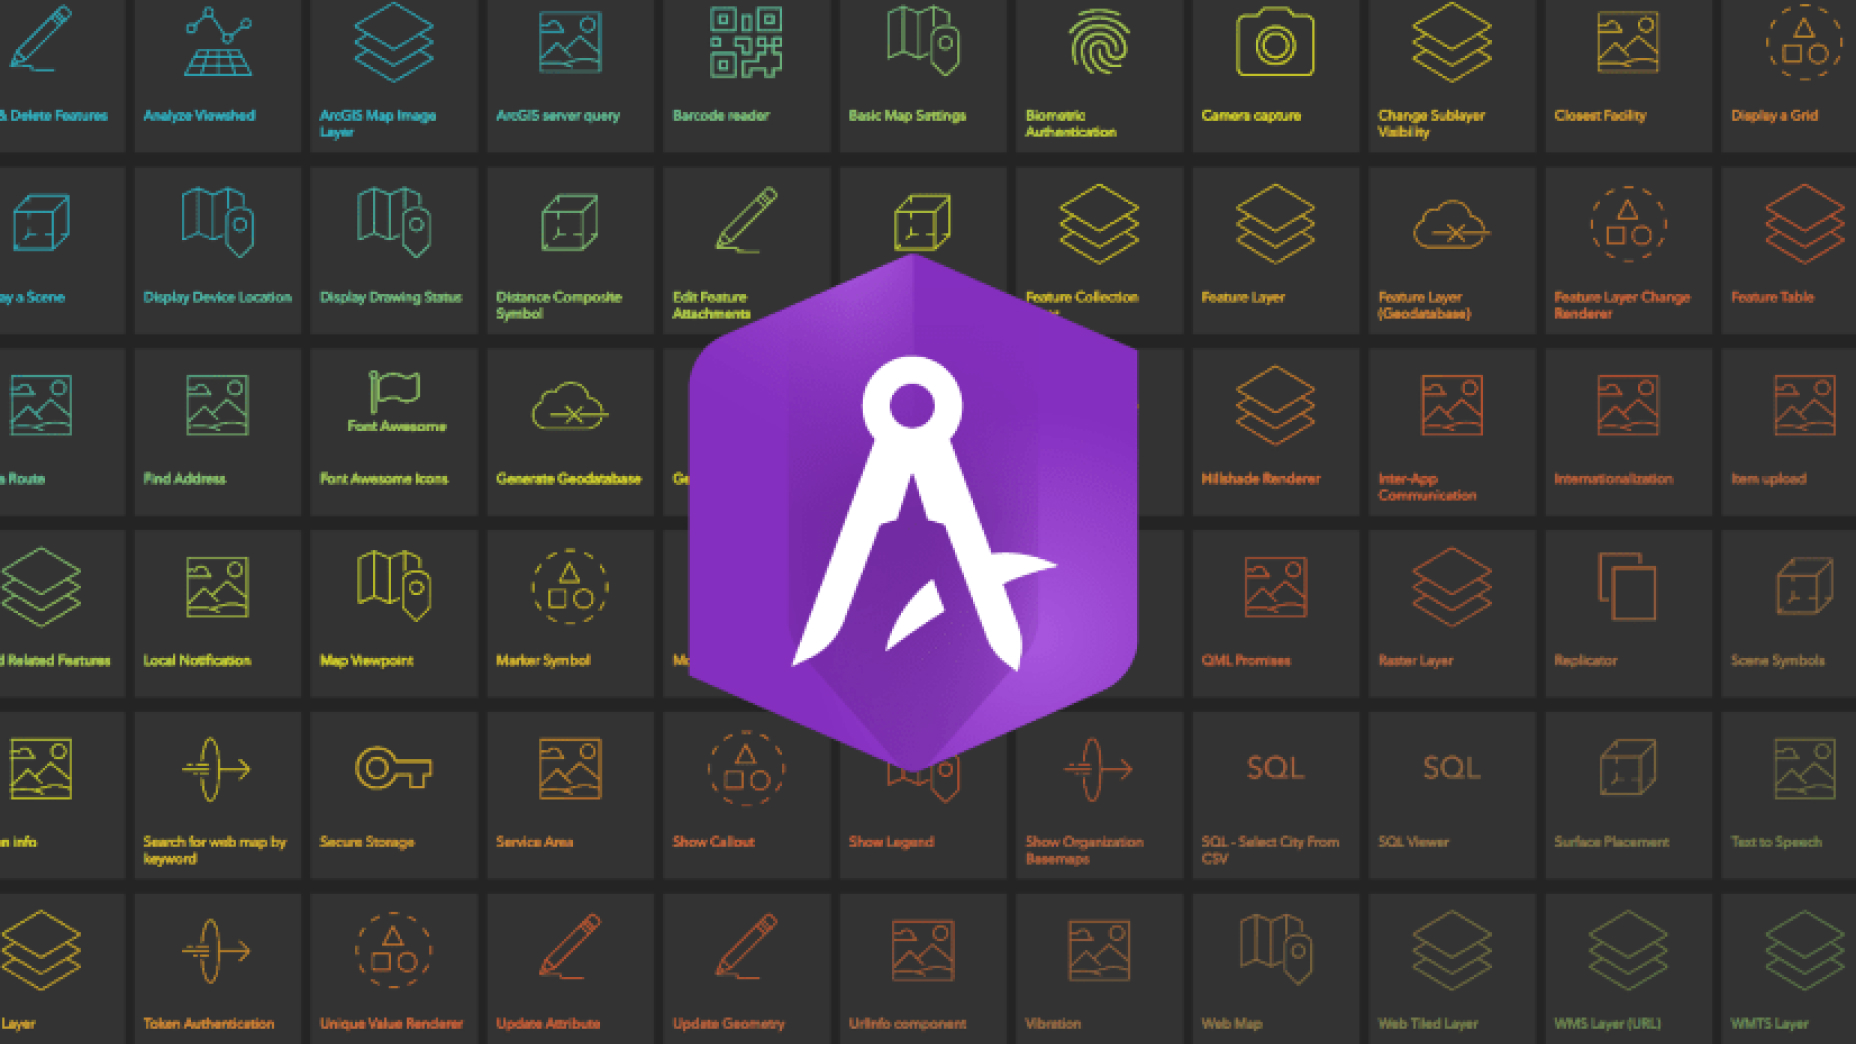 Dark gray square grid with icons overlaid with a purple shape and a white icon inside representing the AppStudio logo